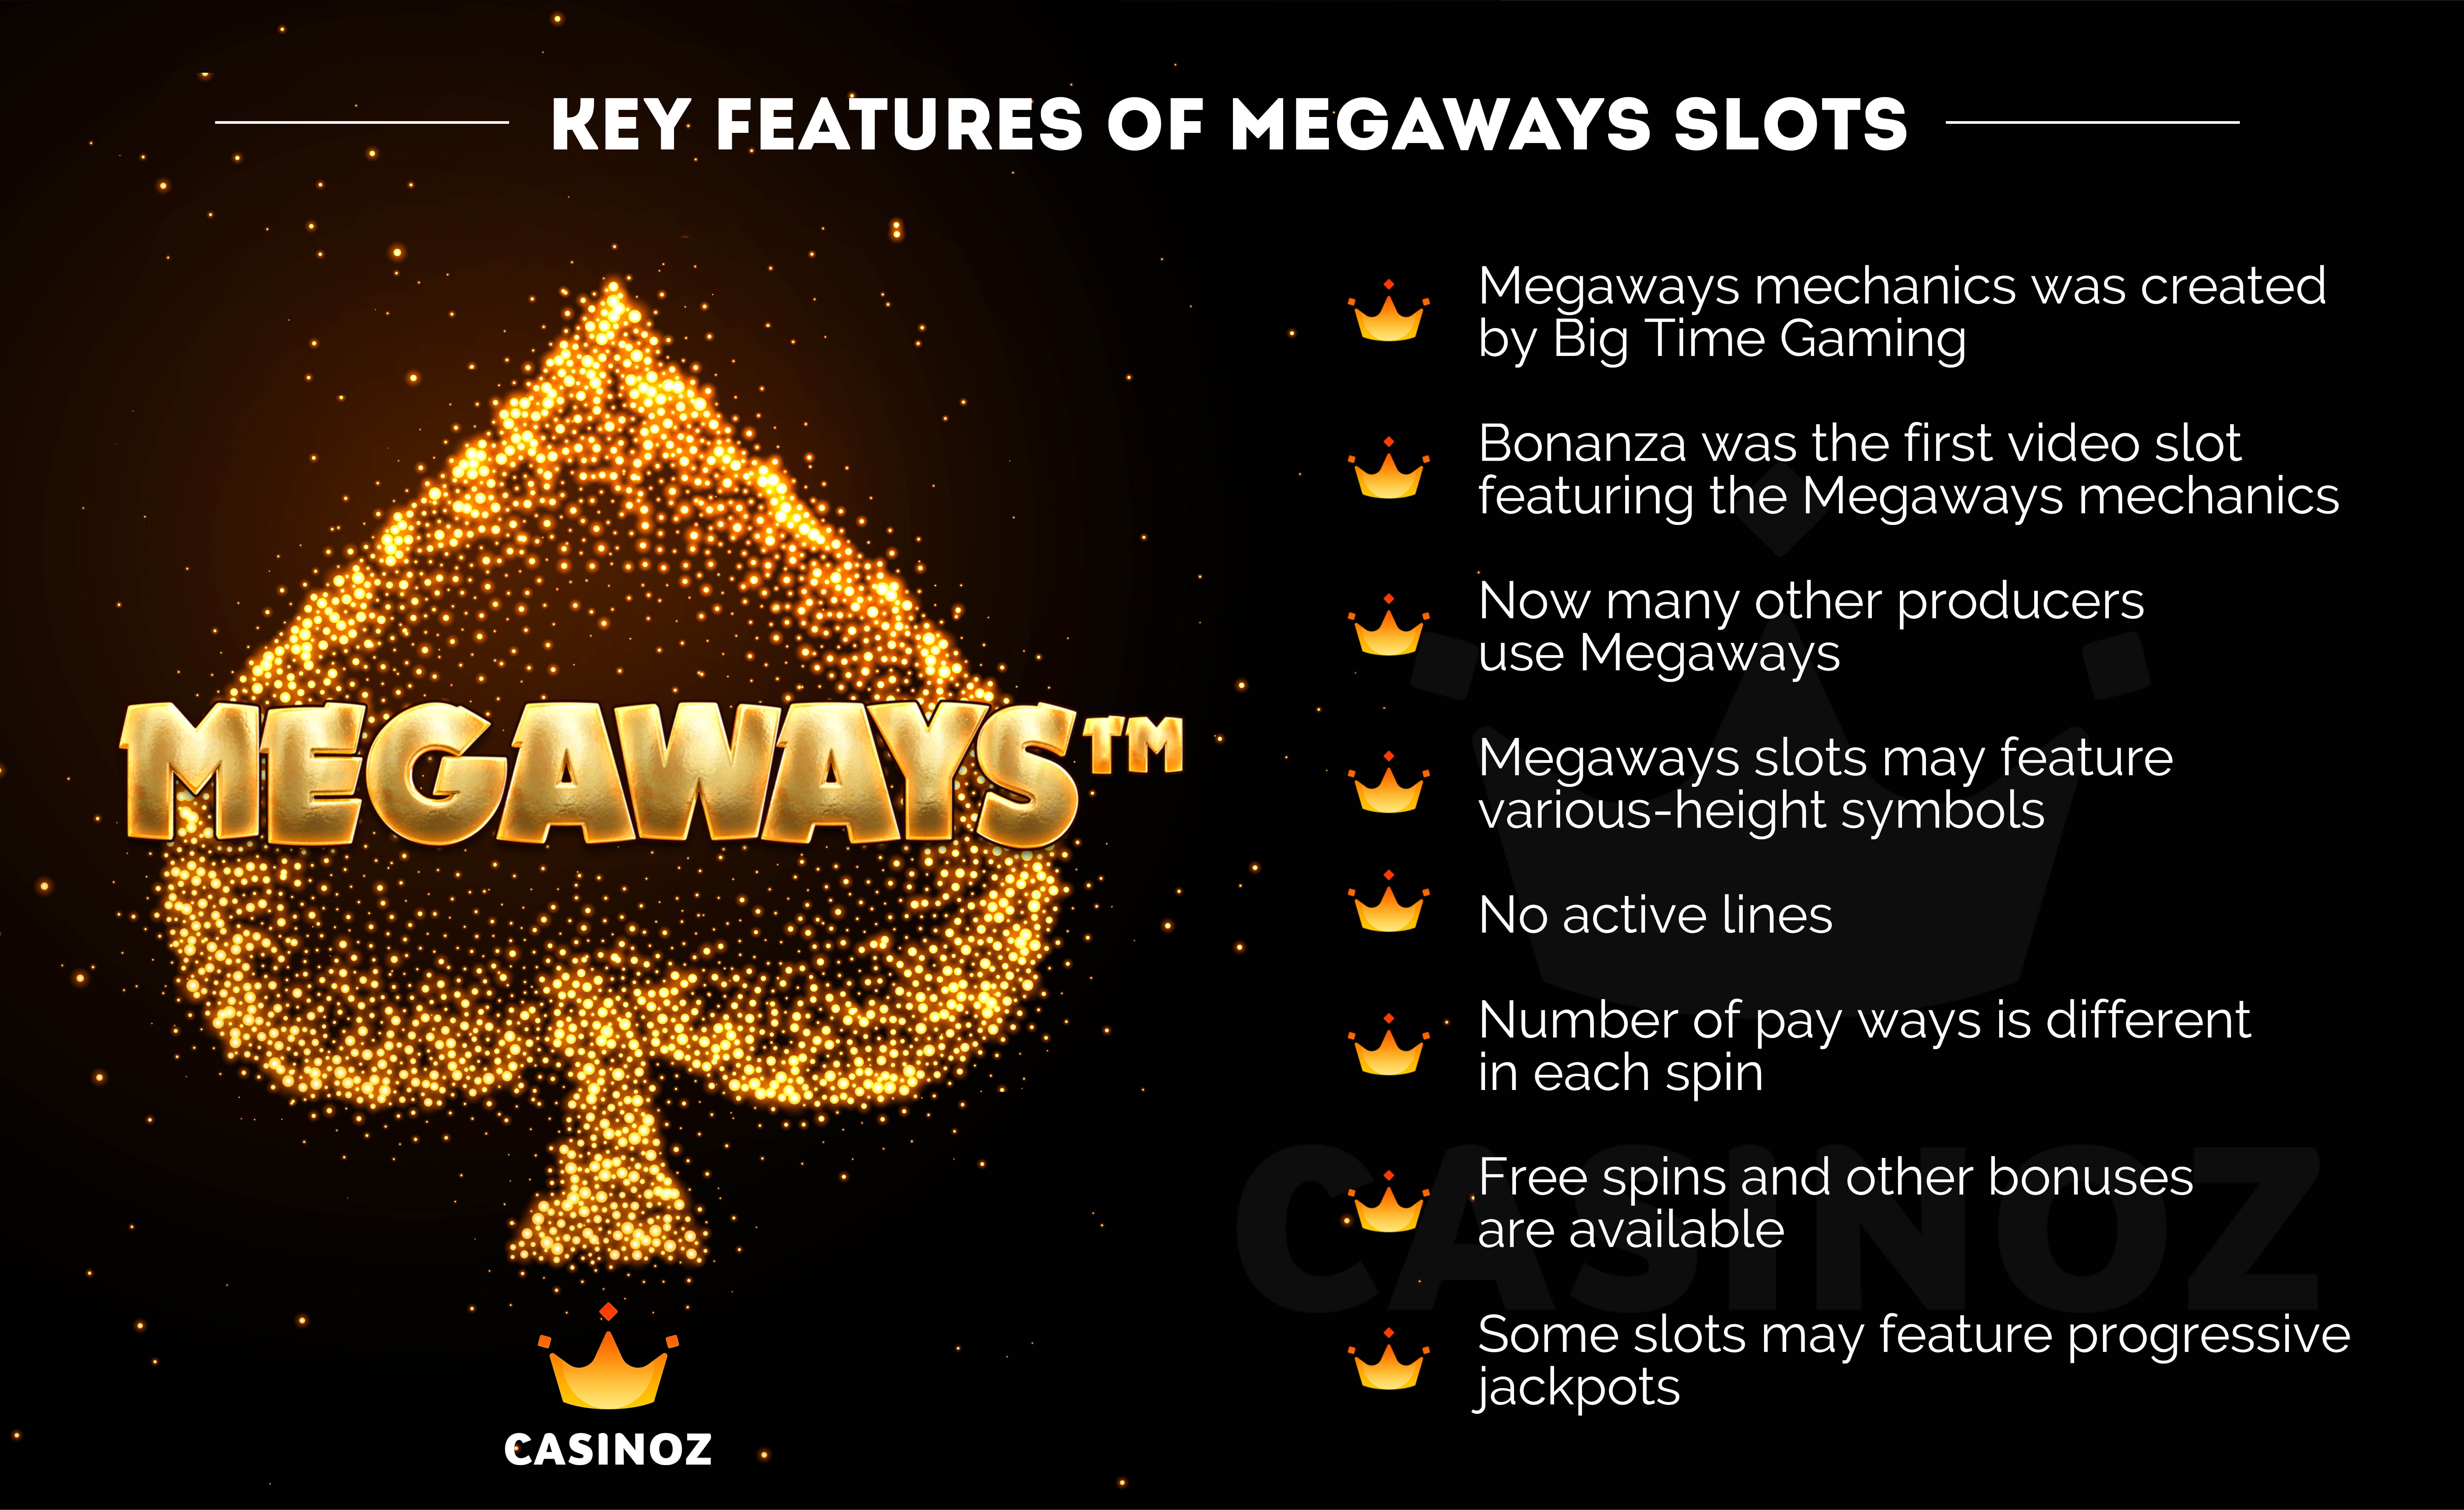 Can I Play Video Slots with Megaways Mechanics?